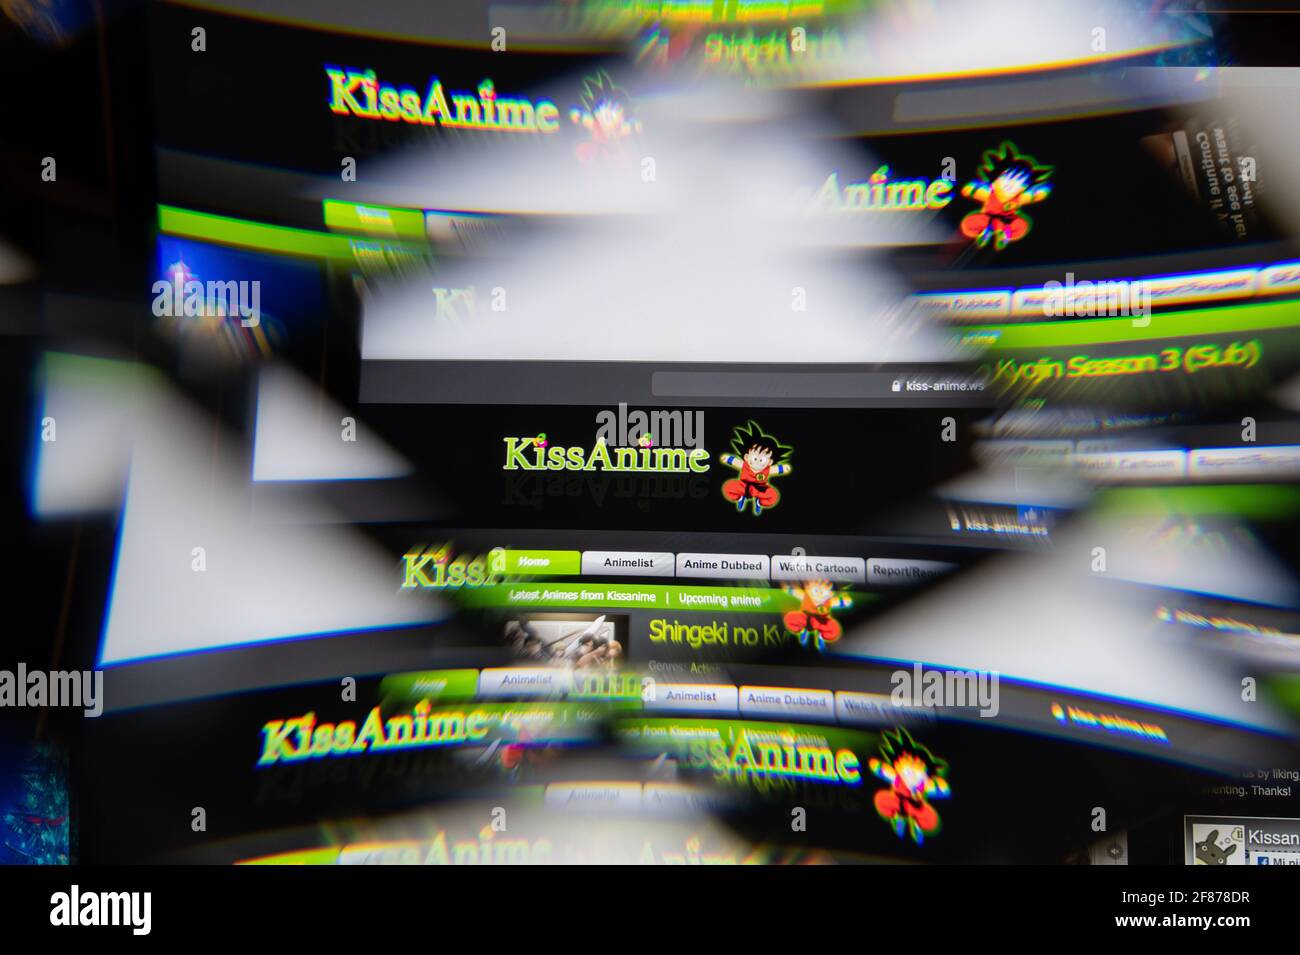 Kissanime Projects  Photos, videos, logos, illustrations and